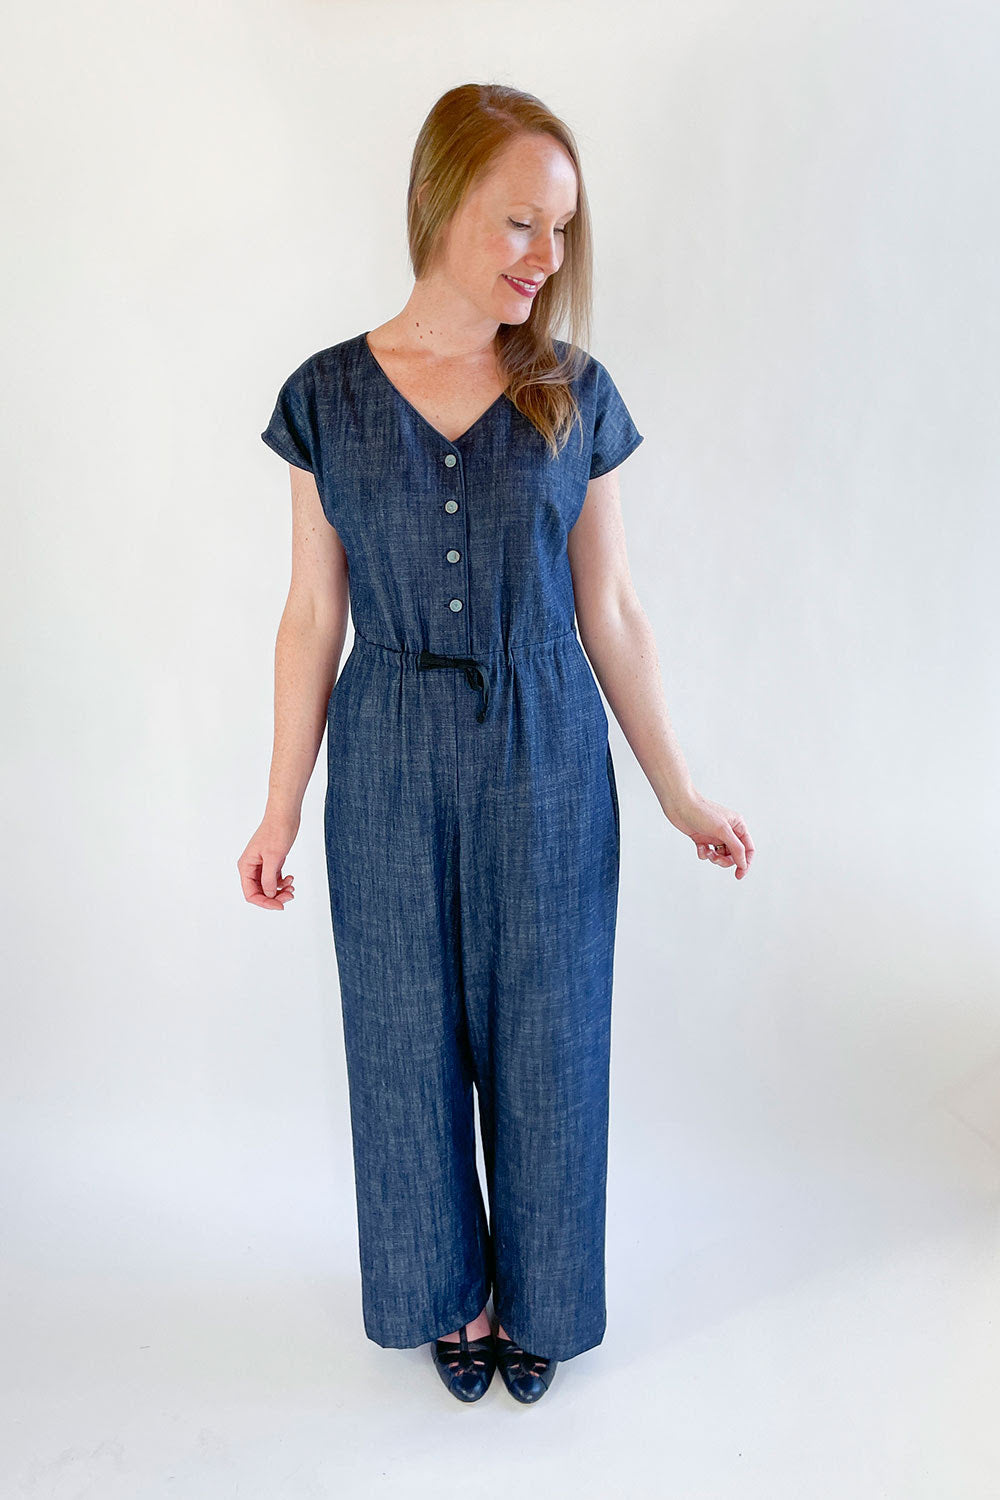 Woman wearing the Farris Jumpsuit sewing pattern from Jennifer Lauren Handmade on The Fold Line. A jumpsuit pattern made in rayon, silks, crepes, cotton lawn, linen, chambray, denim or pinwale corduroy fabrics, featuring grown-on sleeves, V neckline, angl